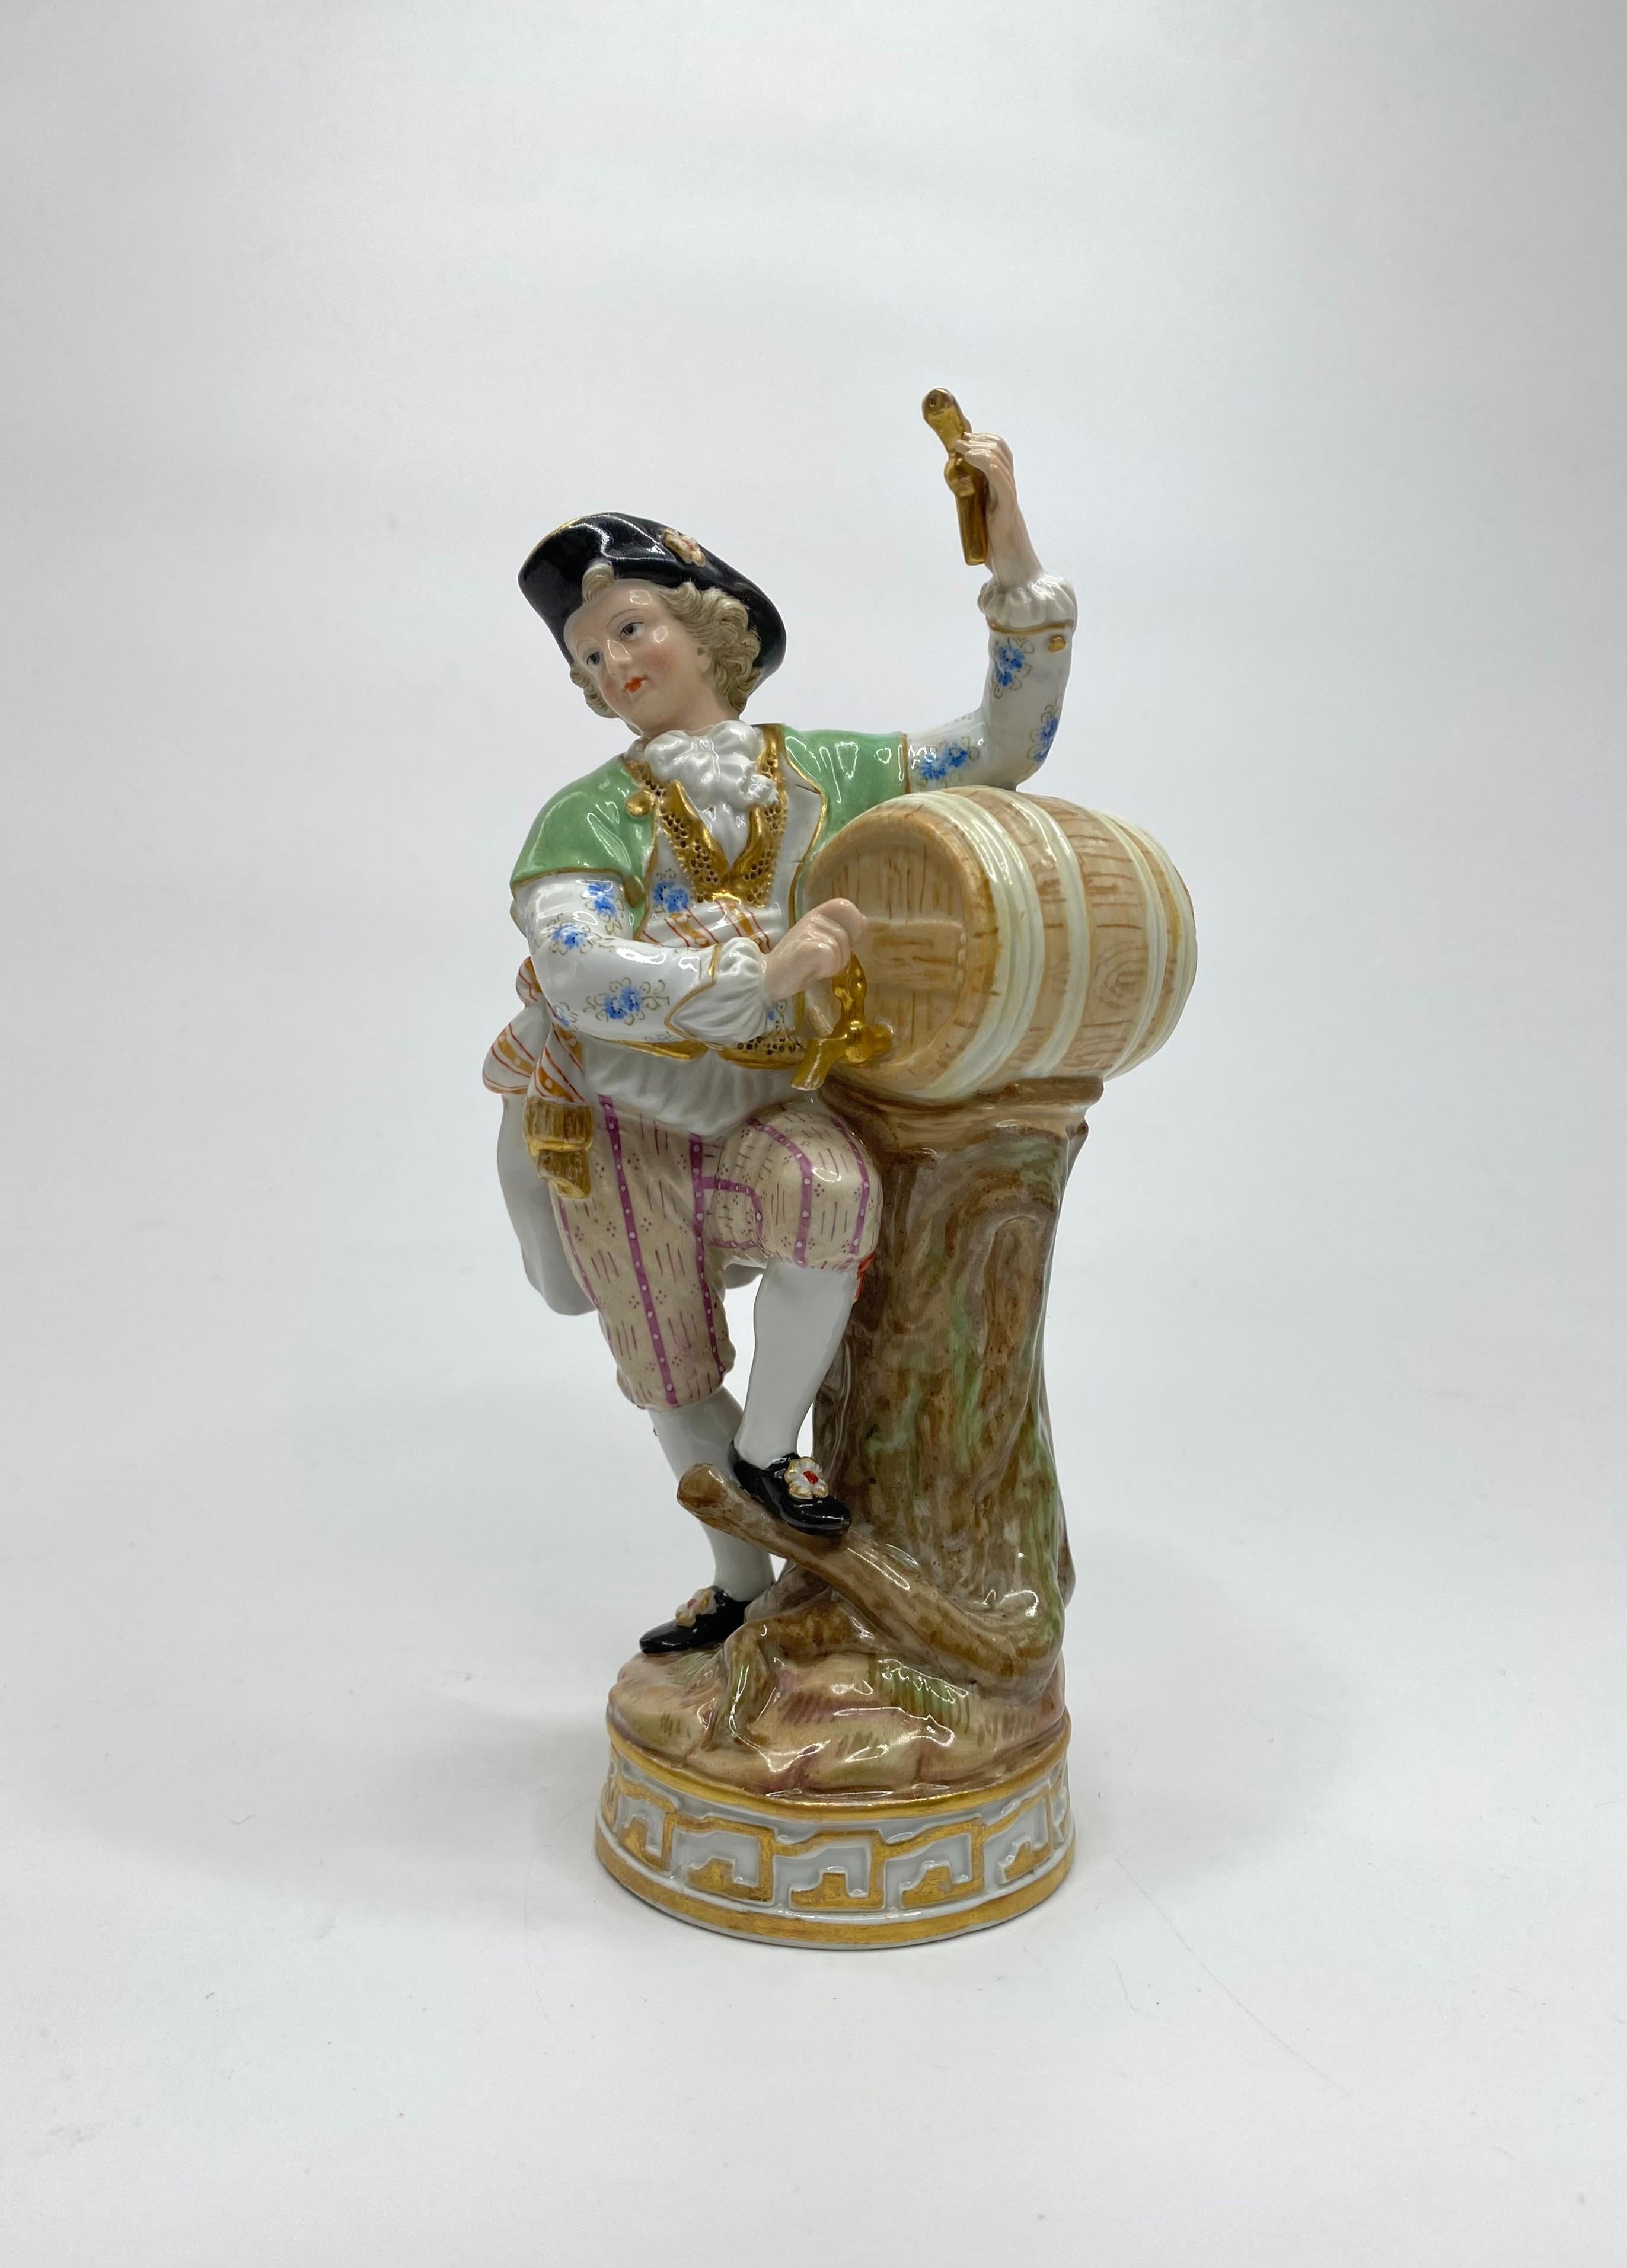 Pair Meissen porcelain ‘Vintners & Companion’, c. 1870.

£1,550.00
A fine pair of Meissen porcelain figures, c. 1870. Modelled after Michel Victor Acier, and based on a drawing by Johan Schenau, as a Vintner and Companion.
Both figures dressed in